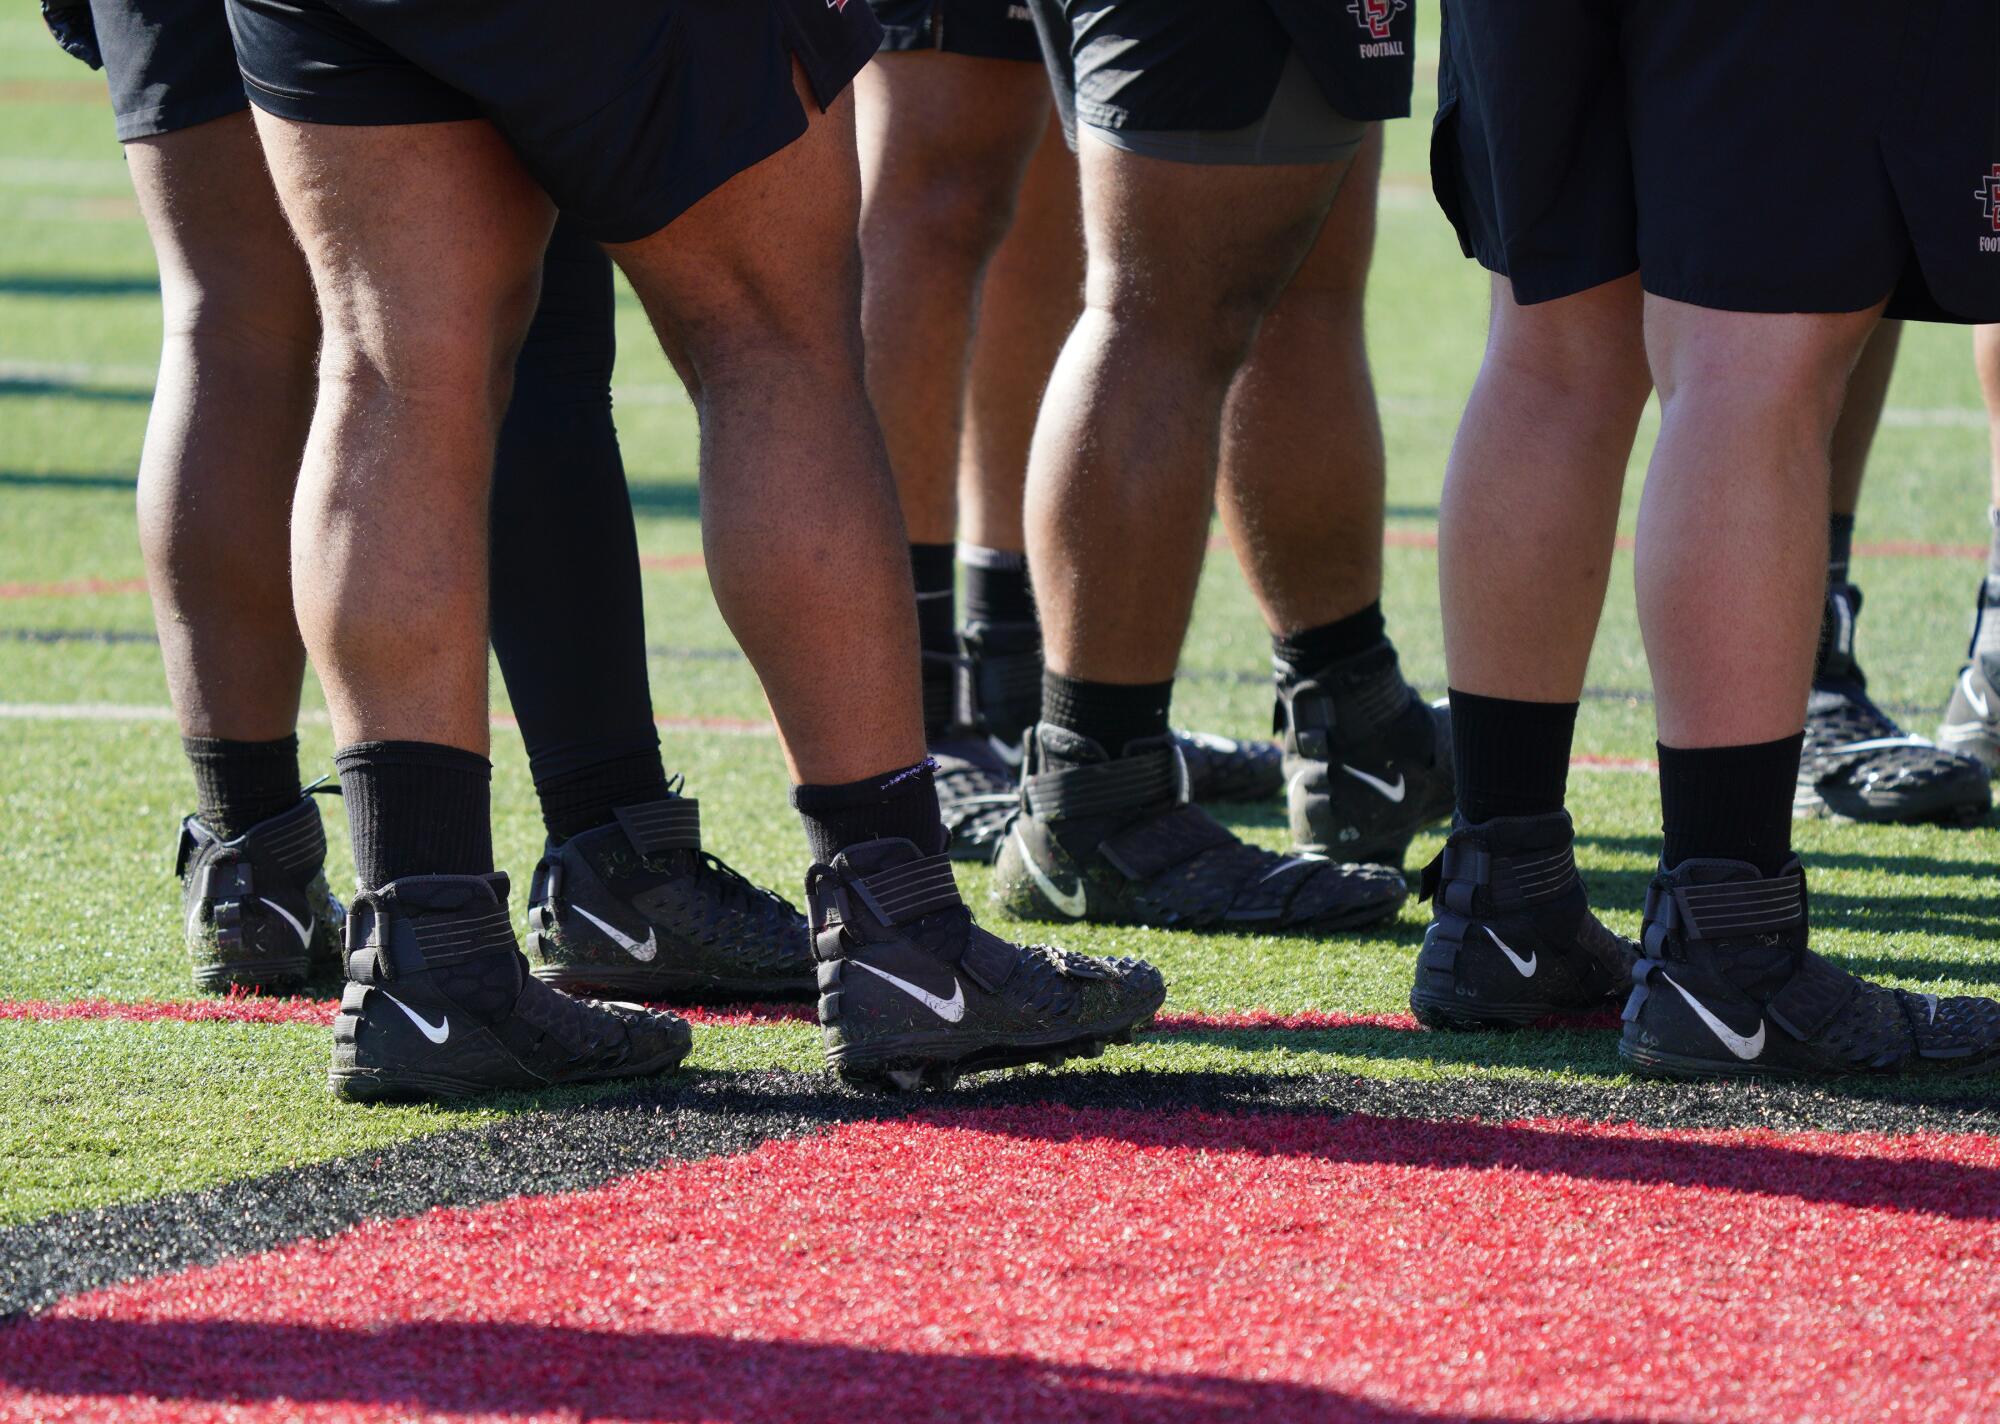 The legs of some players on the SDSU football team.